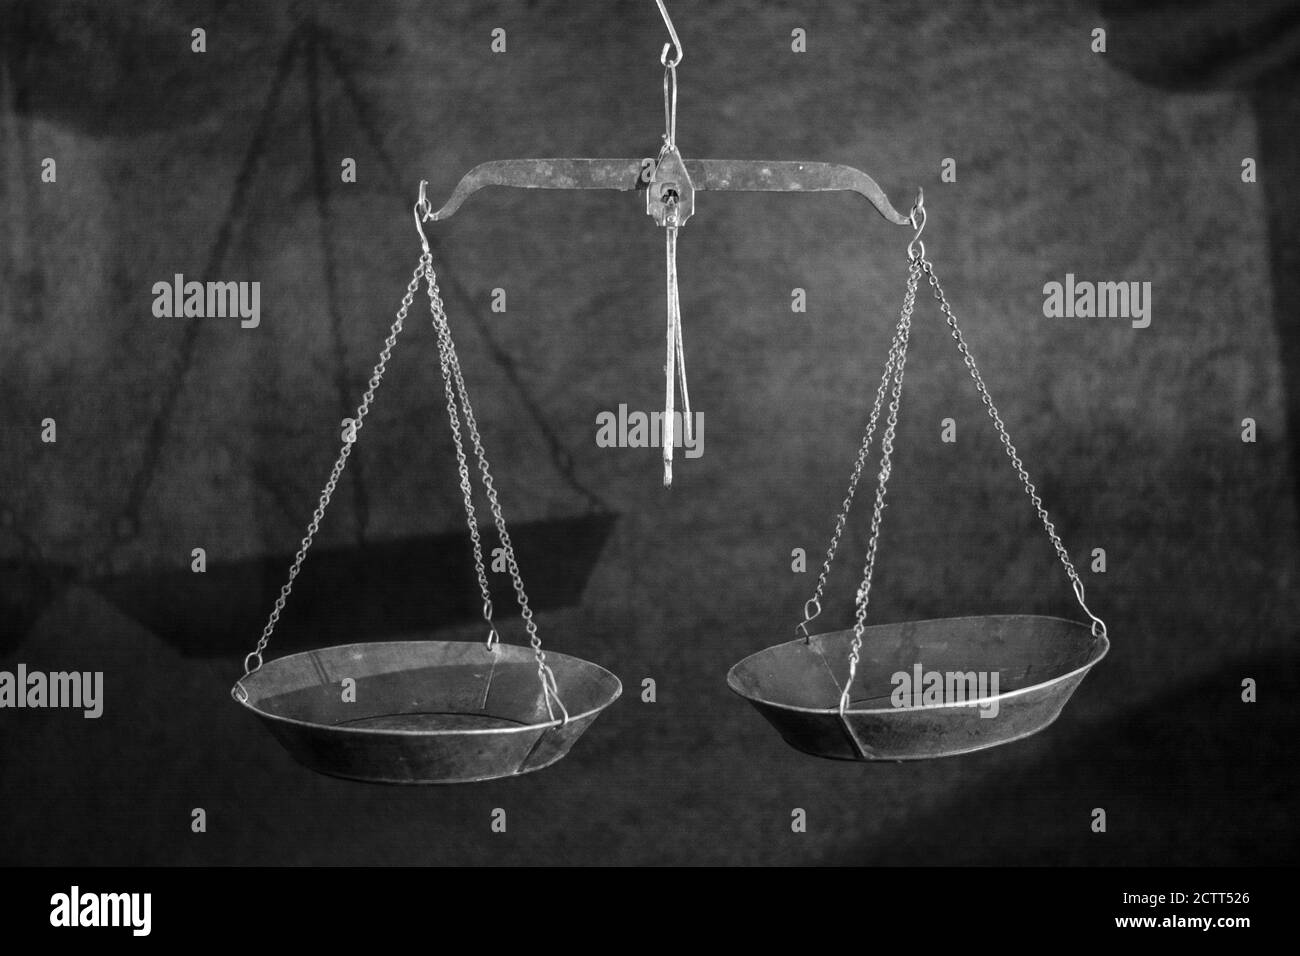 Libra scale Black and White Stock Photos & Images - Alamy